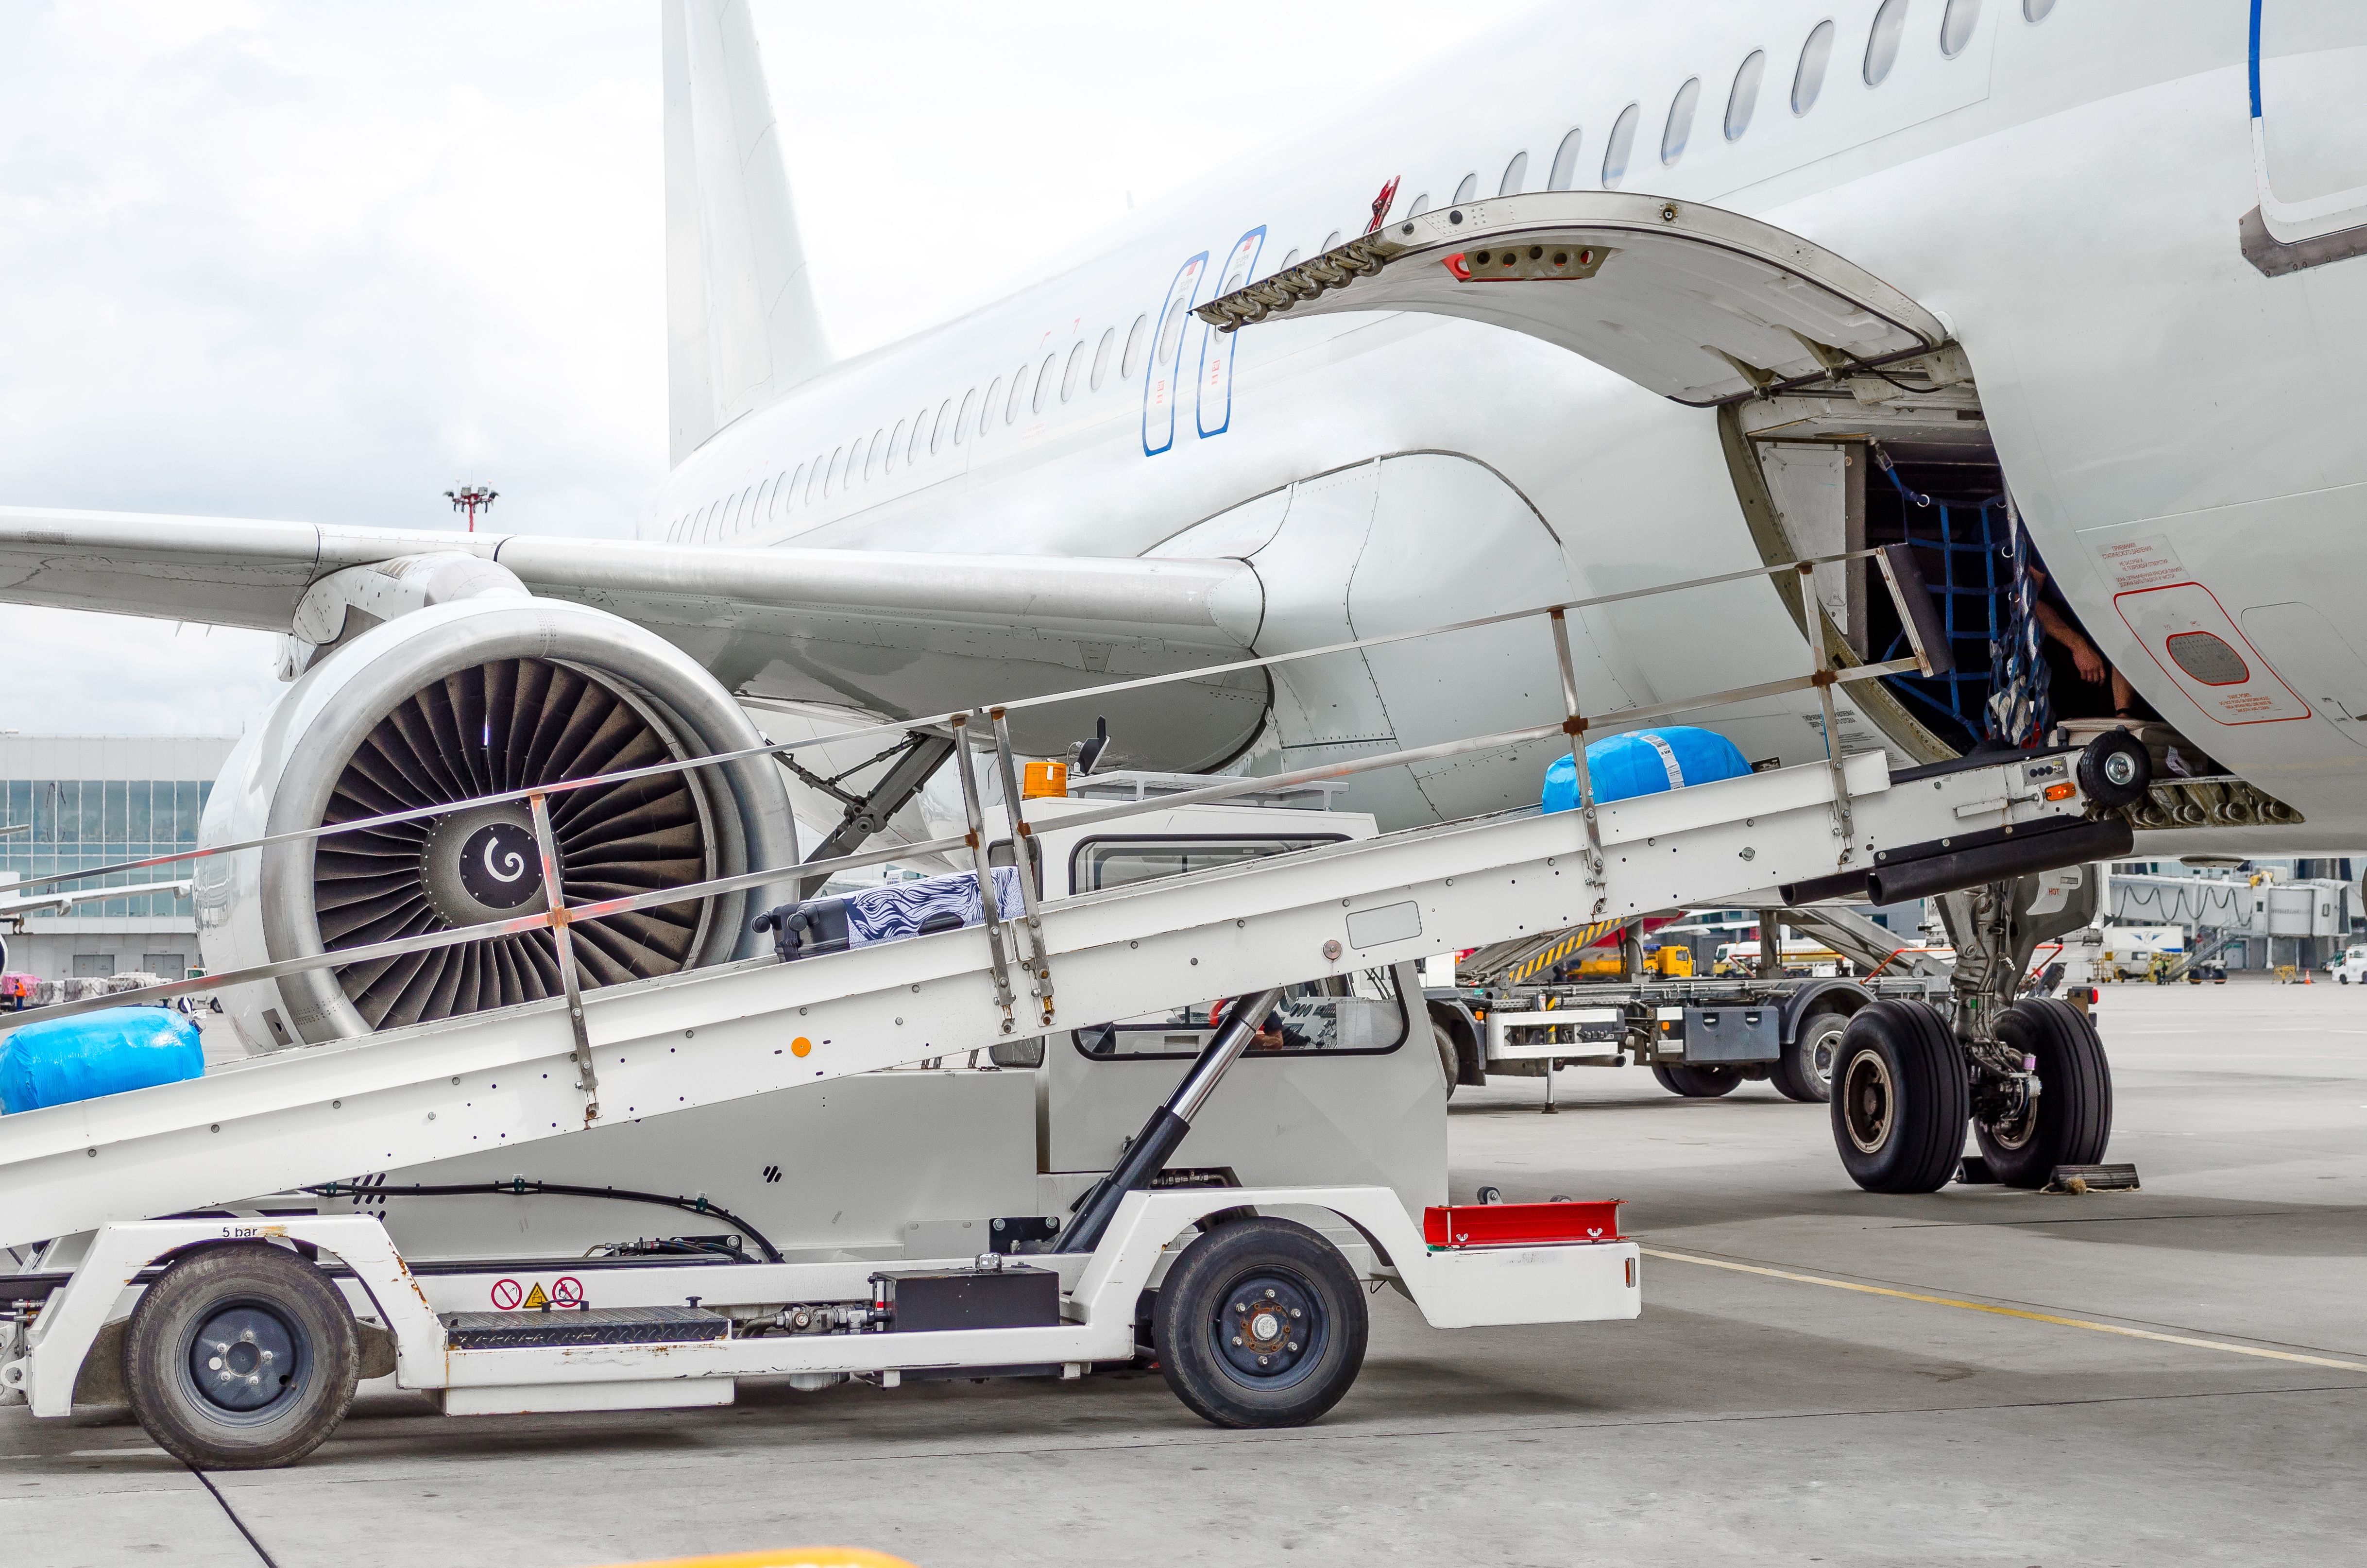 Baggage being loaded into an aircraft